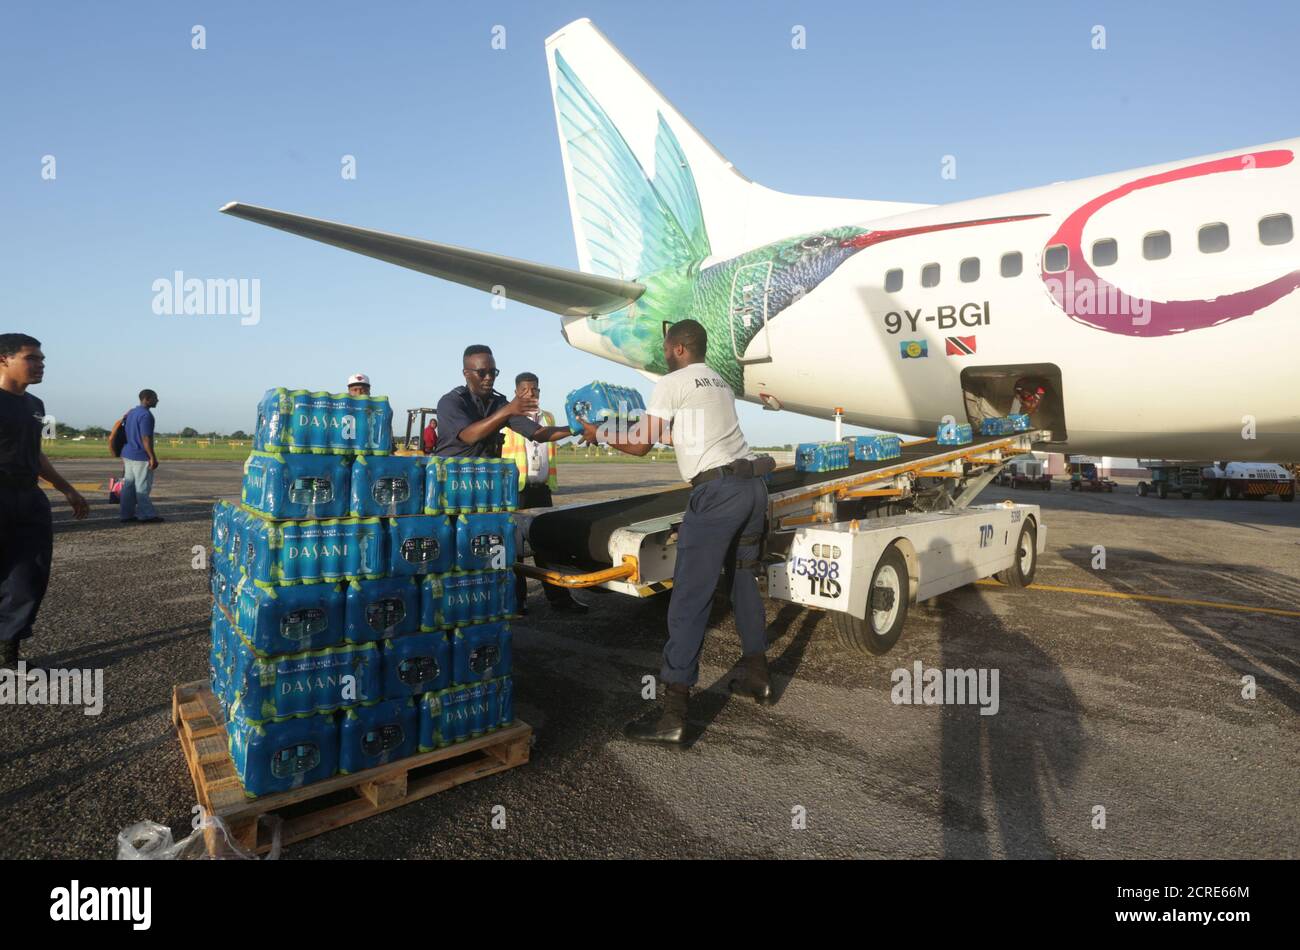 Members of Trinidad and Tobago's Air Guard load water on a relief flight organized by Caribbean airlines, for people on Sin Maarten (Saint Martin) island following Hurricane Irma, at the international airport in Piarco, Trinidad and Tobago September 16, 2017. Picture taken September 16, 2017. REUTERS/Andrea de Silva Stock Photo